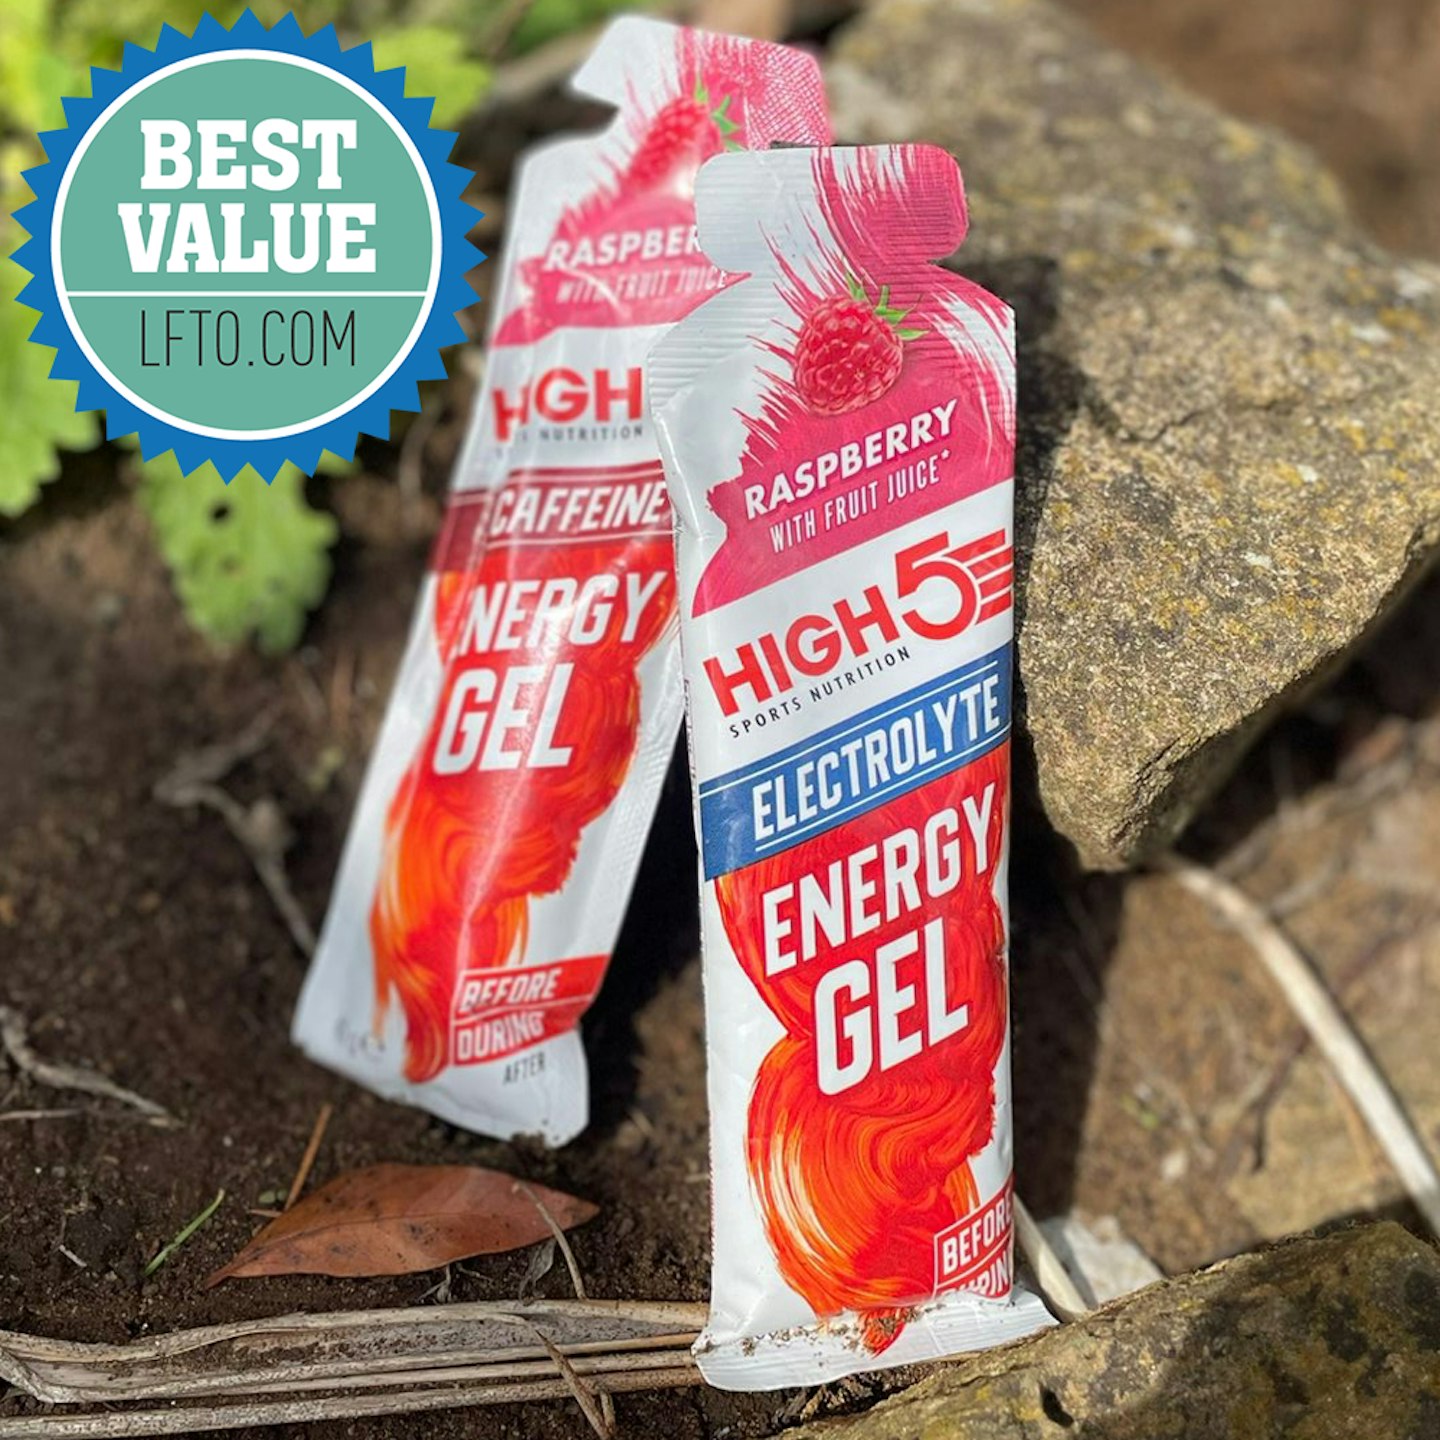 High 5 sports nutrition energy gels for running